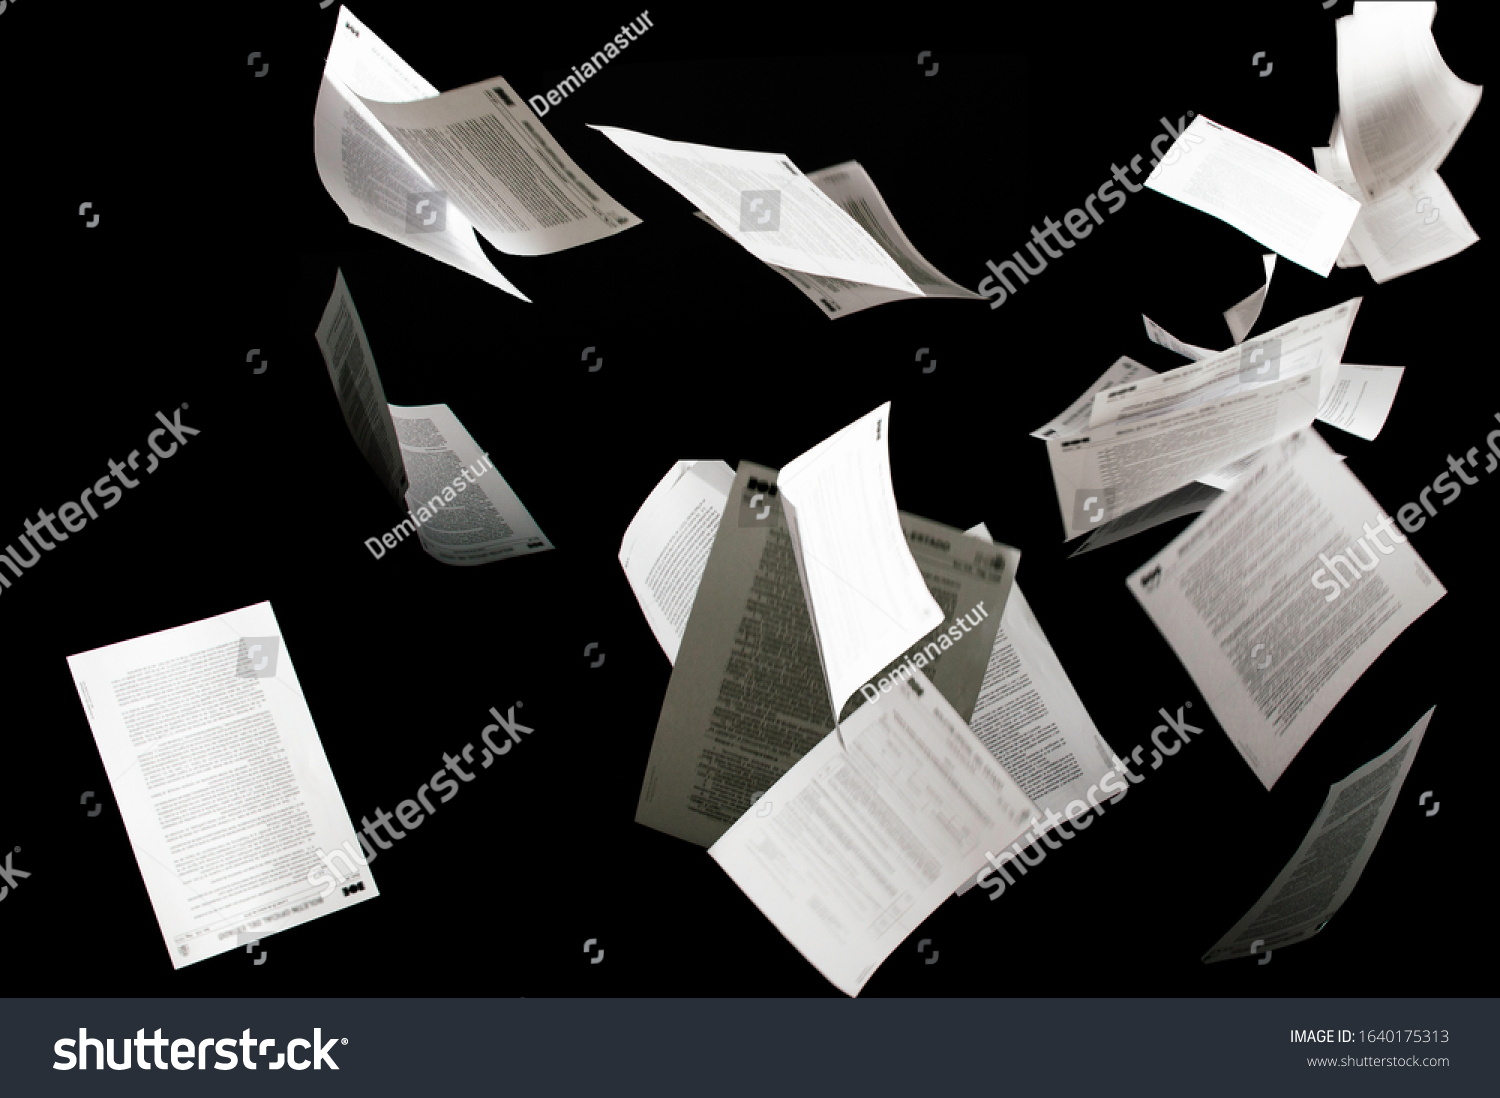 Many flying business documents isolated on black background Papers flying in air in business concept #1640175313